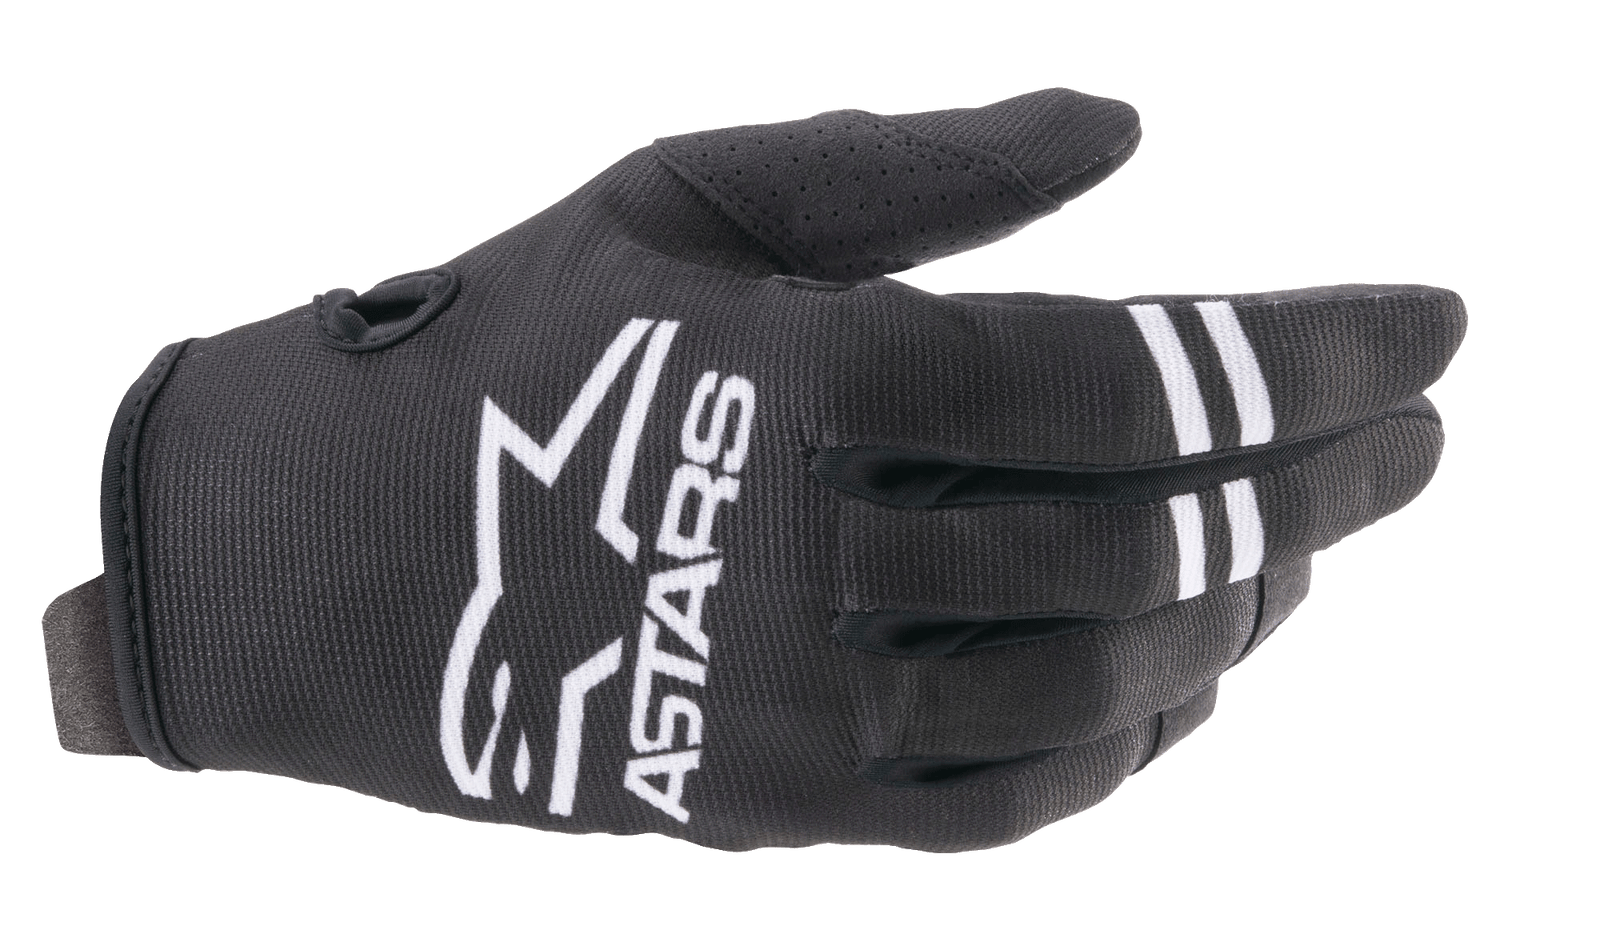 The 2021 Radar Gloves by Alpinestars EU feature a striking black and white design with a prominent logo on the back. The Youth Radar Glove showcases "ONE" and "ASTARS" written in bold white letters on the fingers, a Velcro strap with a stylized Alpinestars logo near the wrist, and a durable synthetic suede palm for enhanced grip.